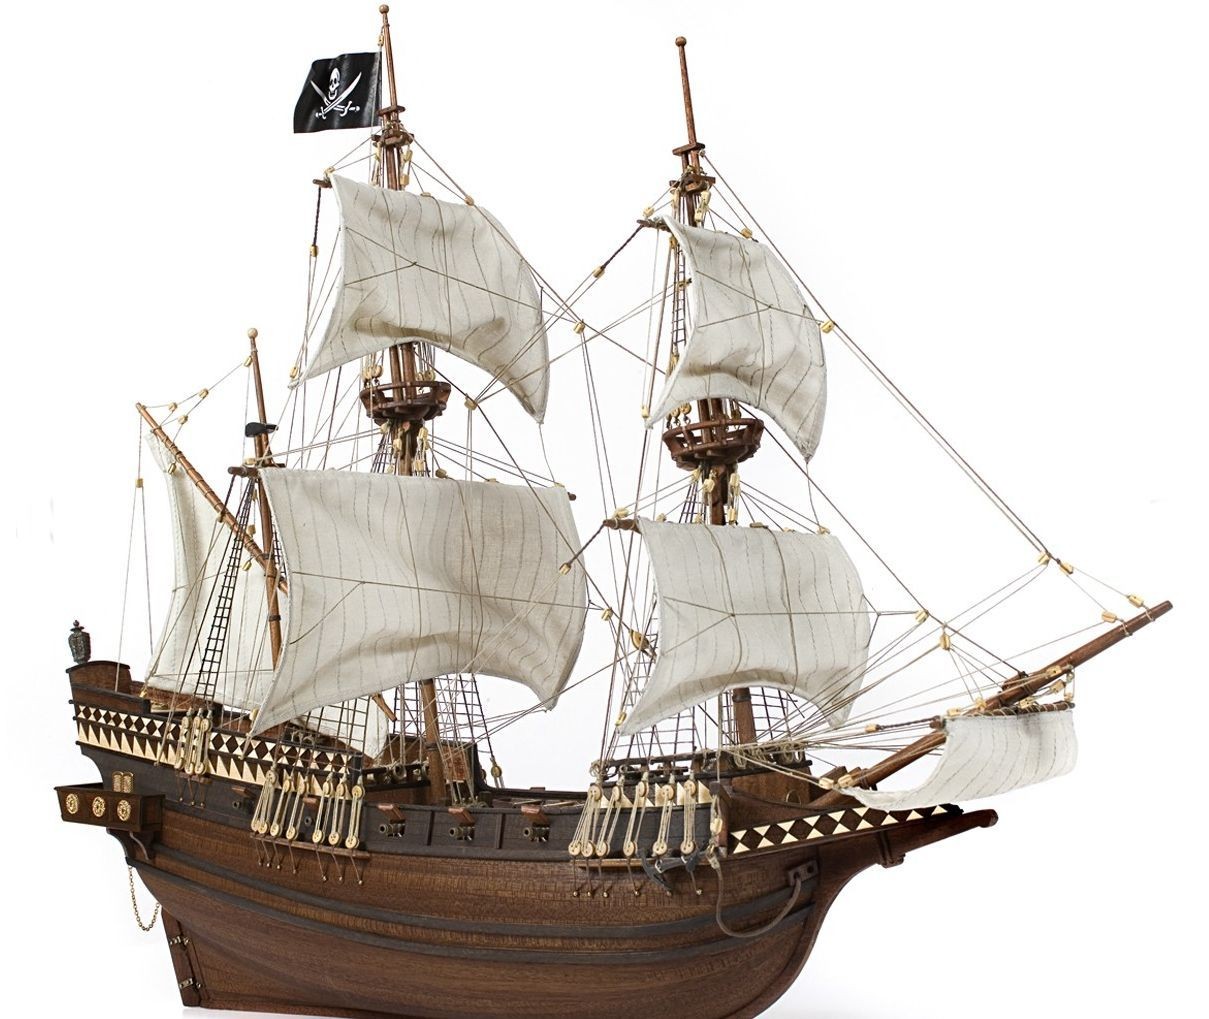 Pirate Ship Papercraft Occre Buccaneer Wooden Pirate Galleon 1 100 Scale Model Ship Kit